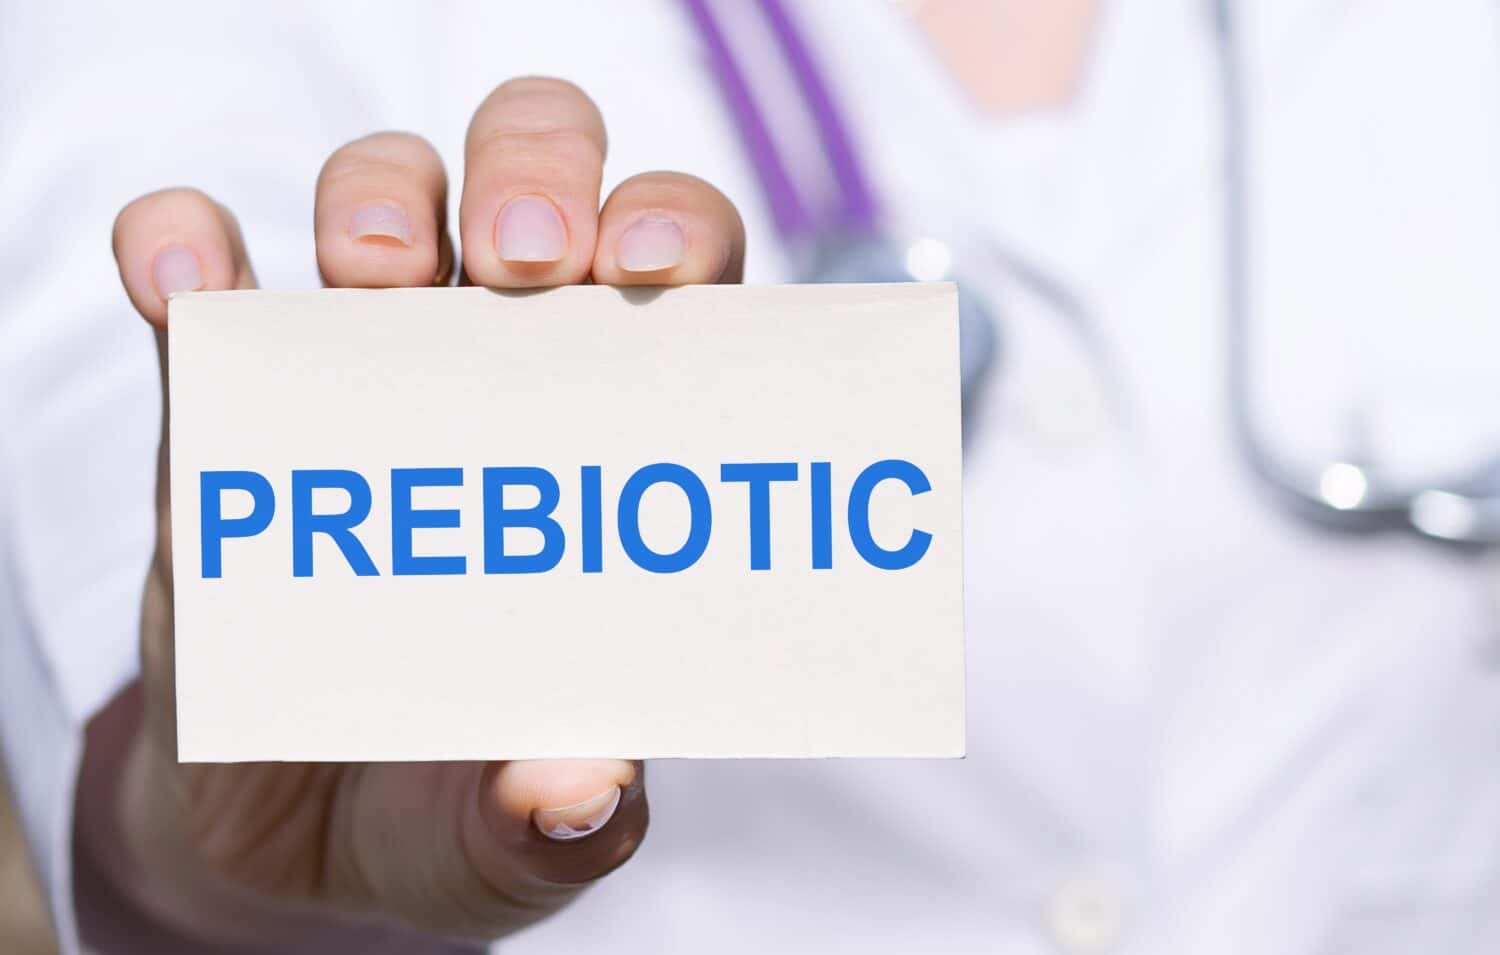 Doctor holding a card with text PREBIOTIC, medical concept